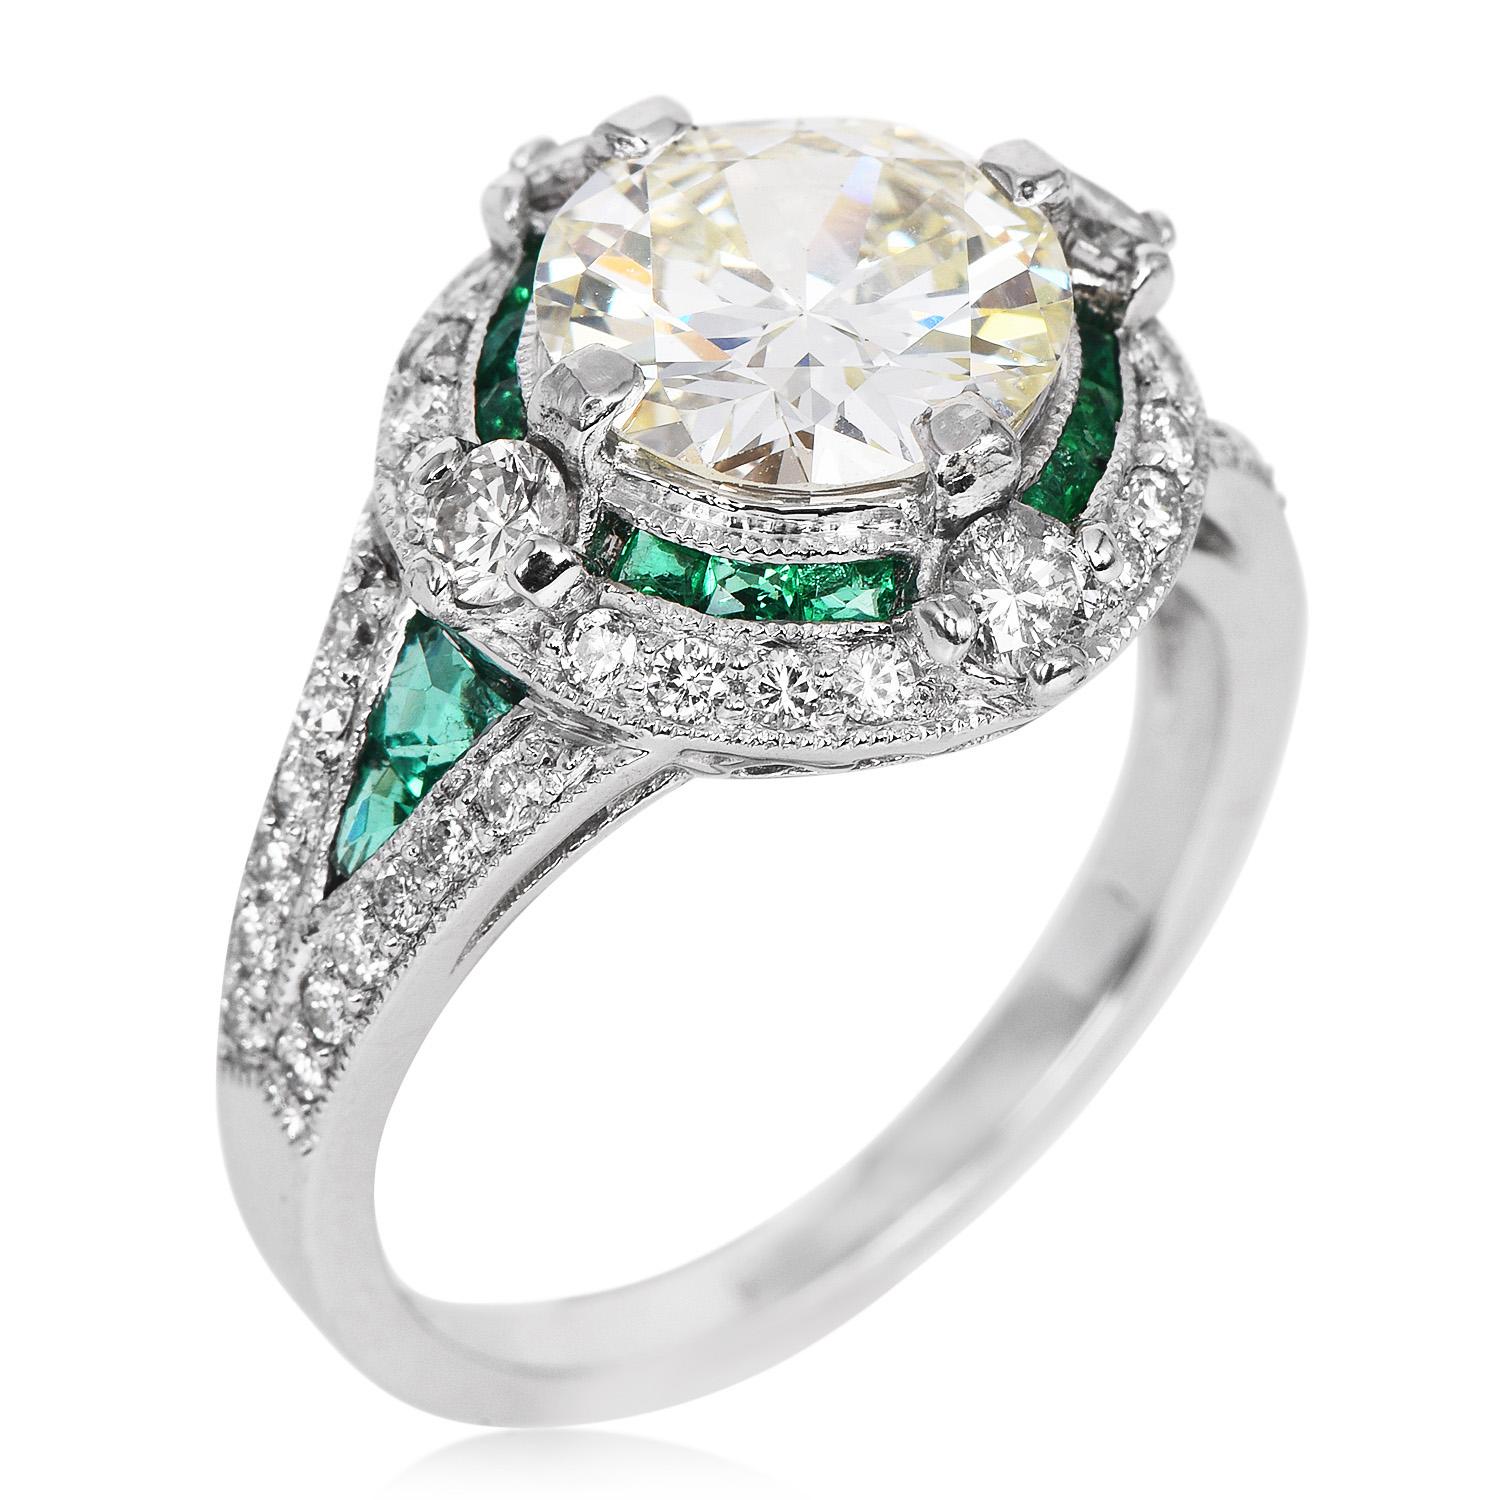 An exquisite display of elegance, brilliance, and color in an Art Deco Engagement Ring.

 This absolutely lovely engagement ring is full of luster and sparkle! Finely crafted in Platinum,

The center displays a genuine natural Round cut diamond of